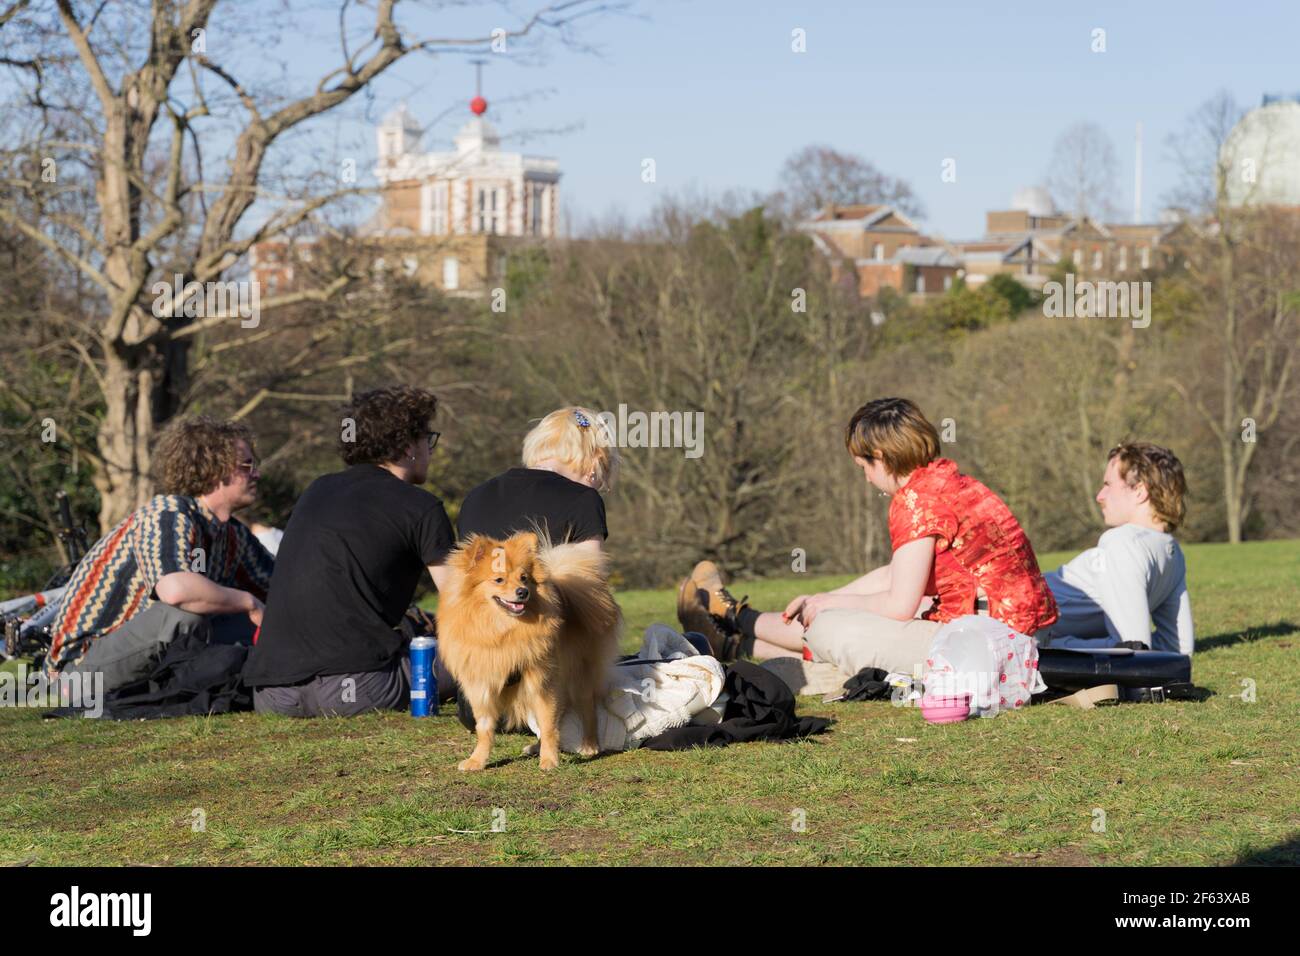 Poodle dog accompanies group of people enjoying sunny weather in London greenwich park, with lockdown easing today on 29th march 2021 Stock Photo